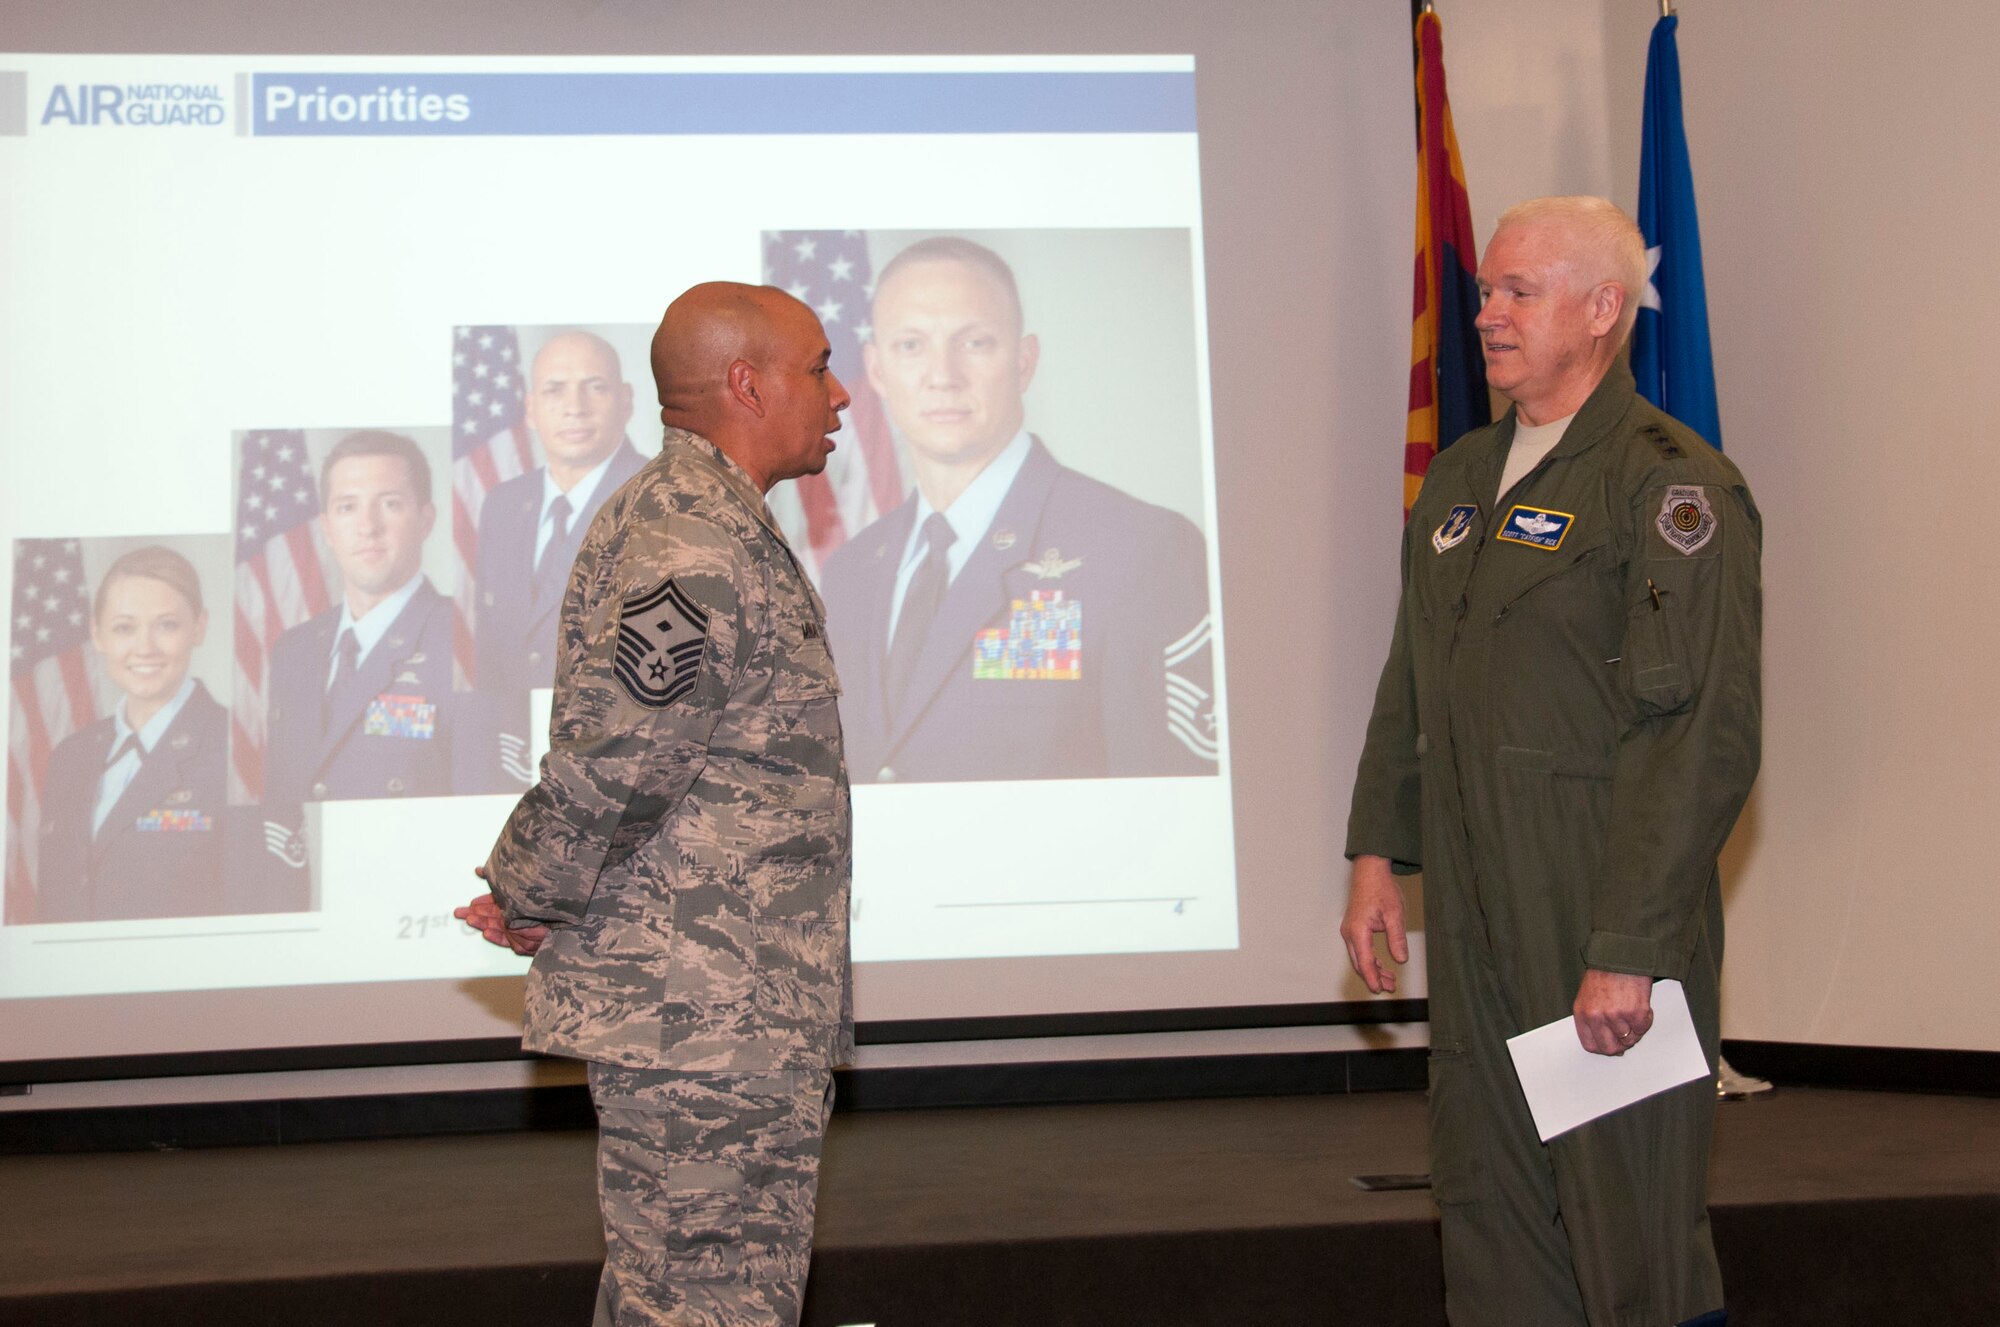 Lt. Gen. L. Scott Rice, director of the Air National Guard, recognized Senior Master Sgt. Jack Minaya, a first sergeant with the 162nd Wing’s 214th Reconnaissance Group and one of the 2016 outstanding Airmen during a visit to the Arizona Air National Guard base at Tucson International Airport, June 29-30.  The visit is Rice’s first since becoming director. (U.S. Air National Guard photo by 1st Lt. Lacey Roberts)